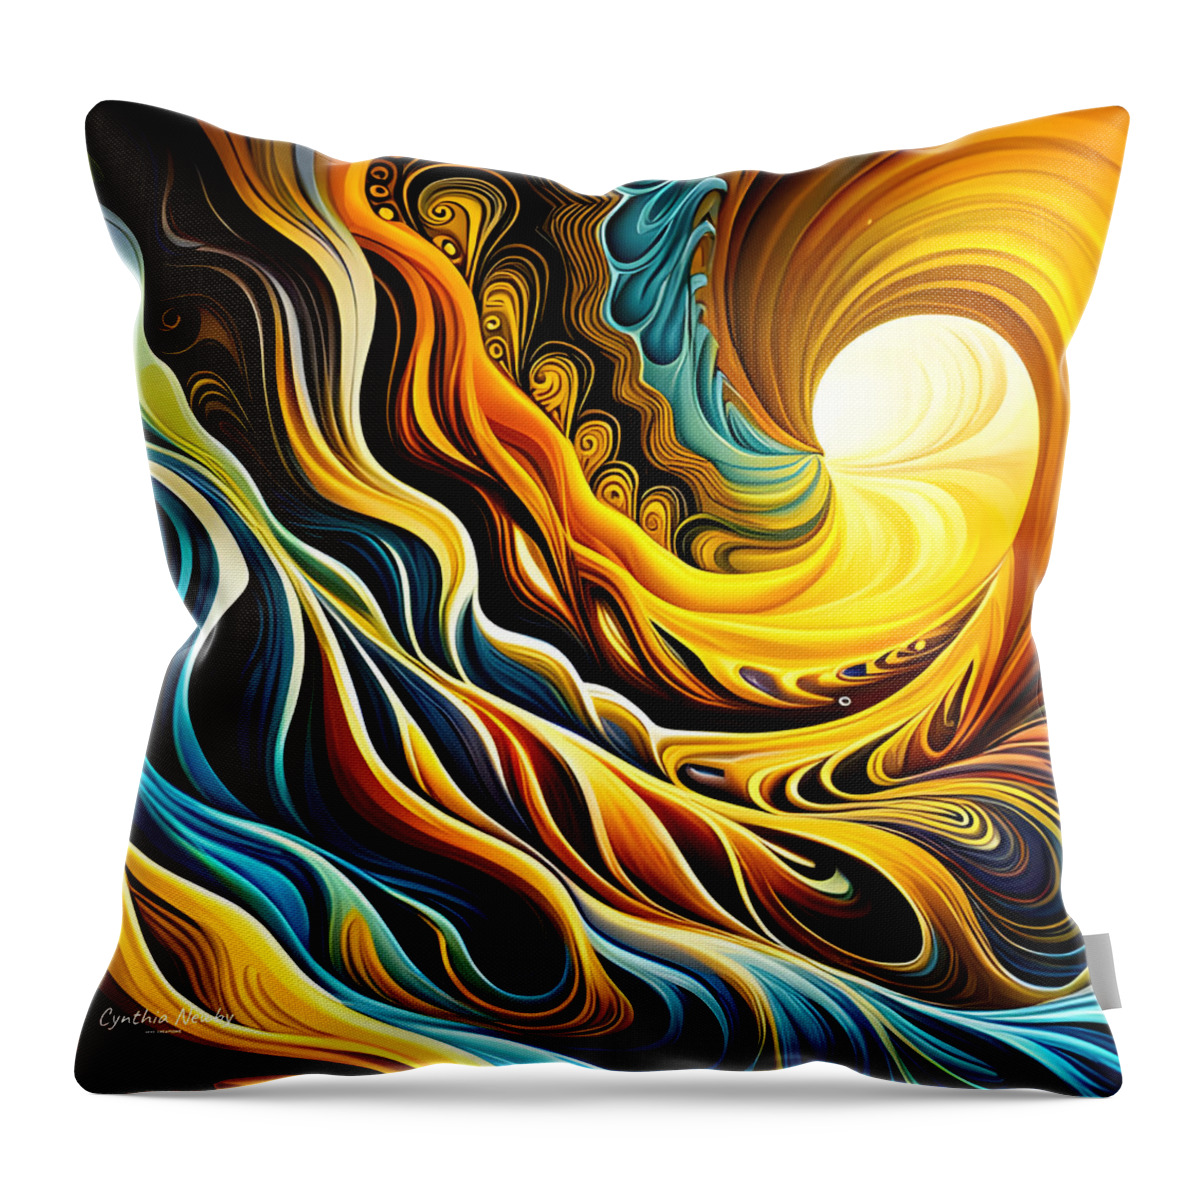 Digital Throw Pillow featuring the digital art Yellow and Blue Wave by Cindy's Creative Corner